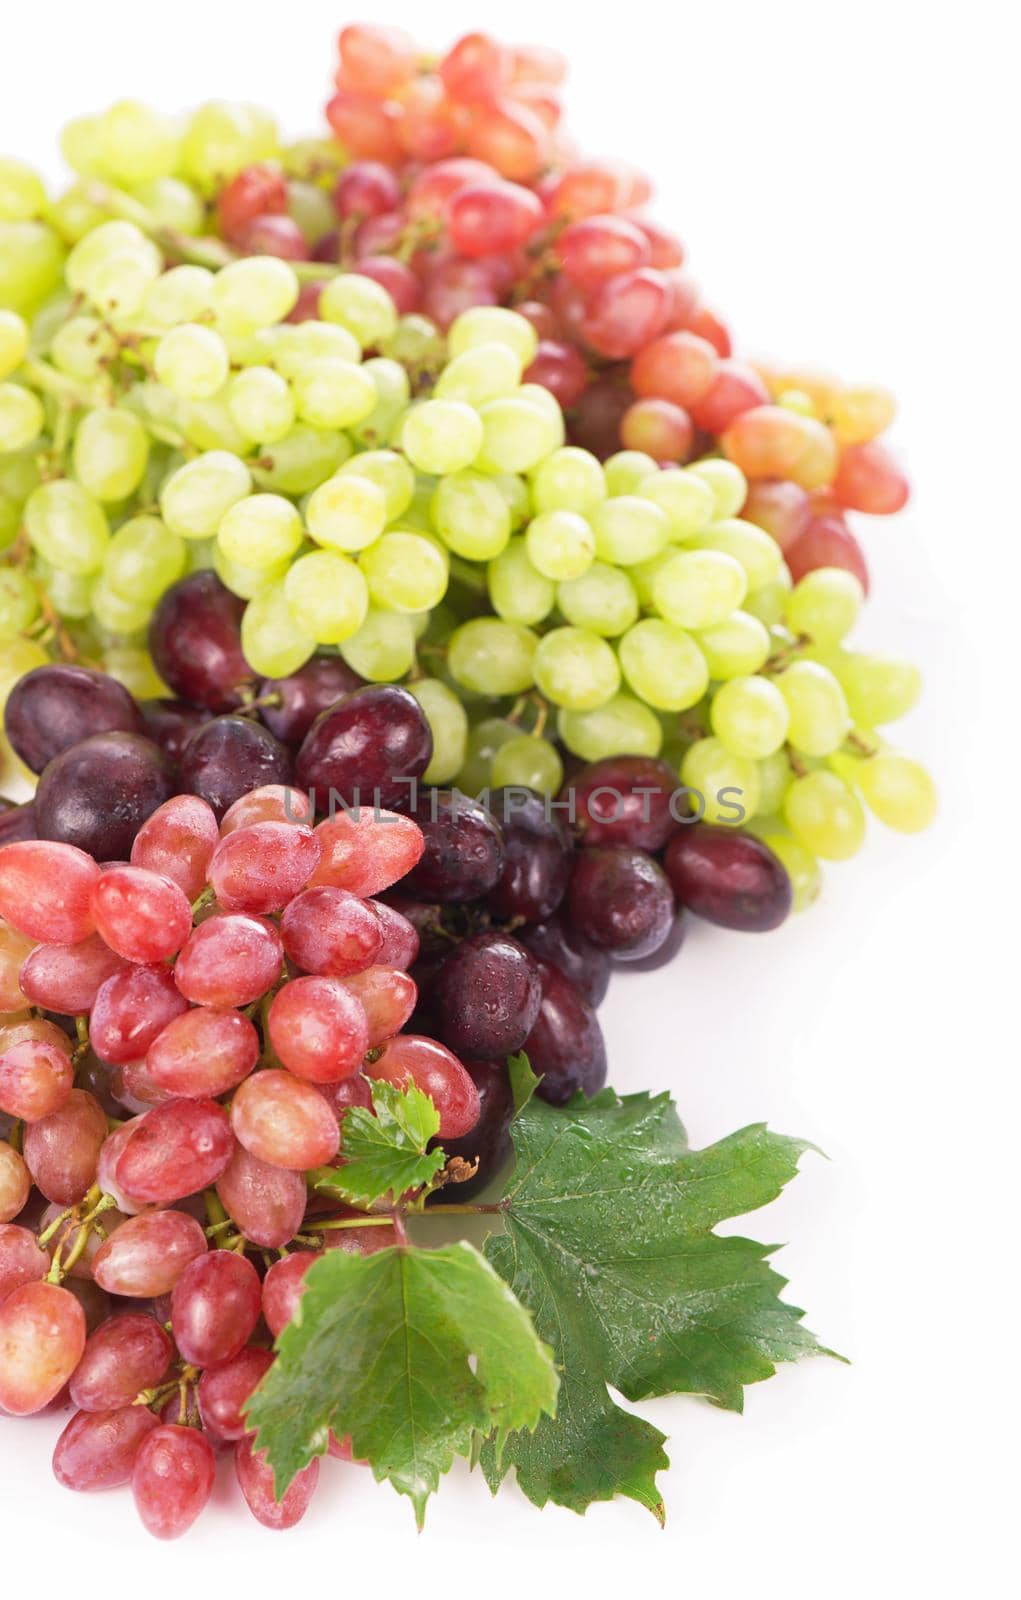 Red and white grapes, wine grapes.